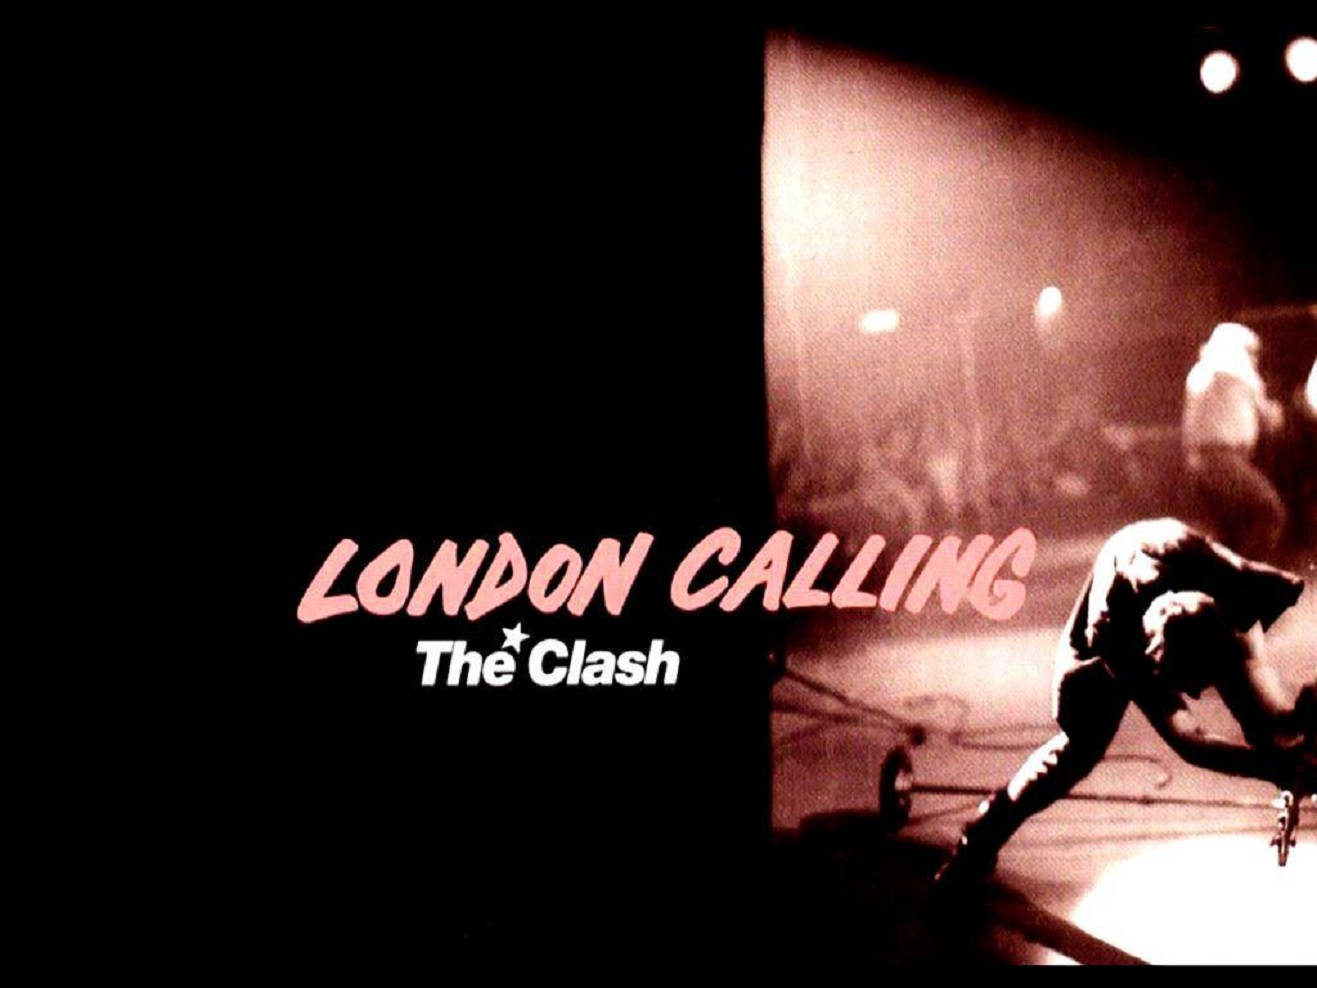 Capturing The Spirit Of Punk Rock: 25th Anniversary Edition Of London Calling By The Clash Wallpaper